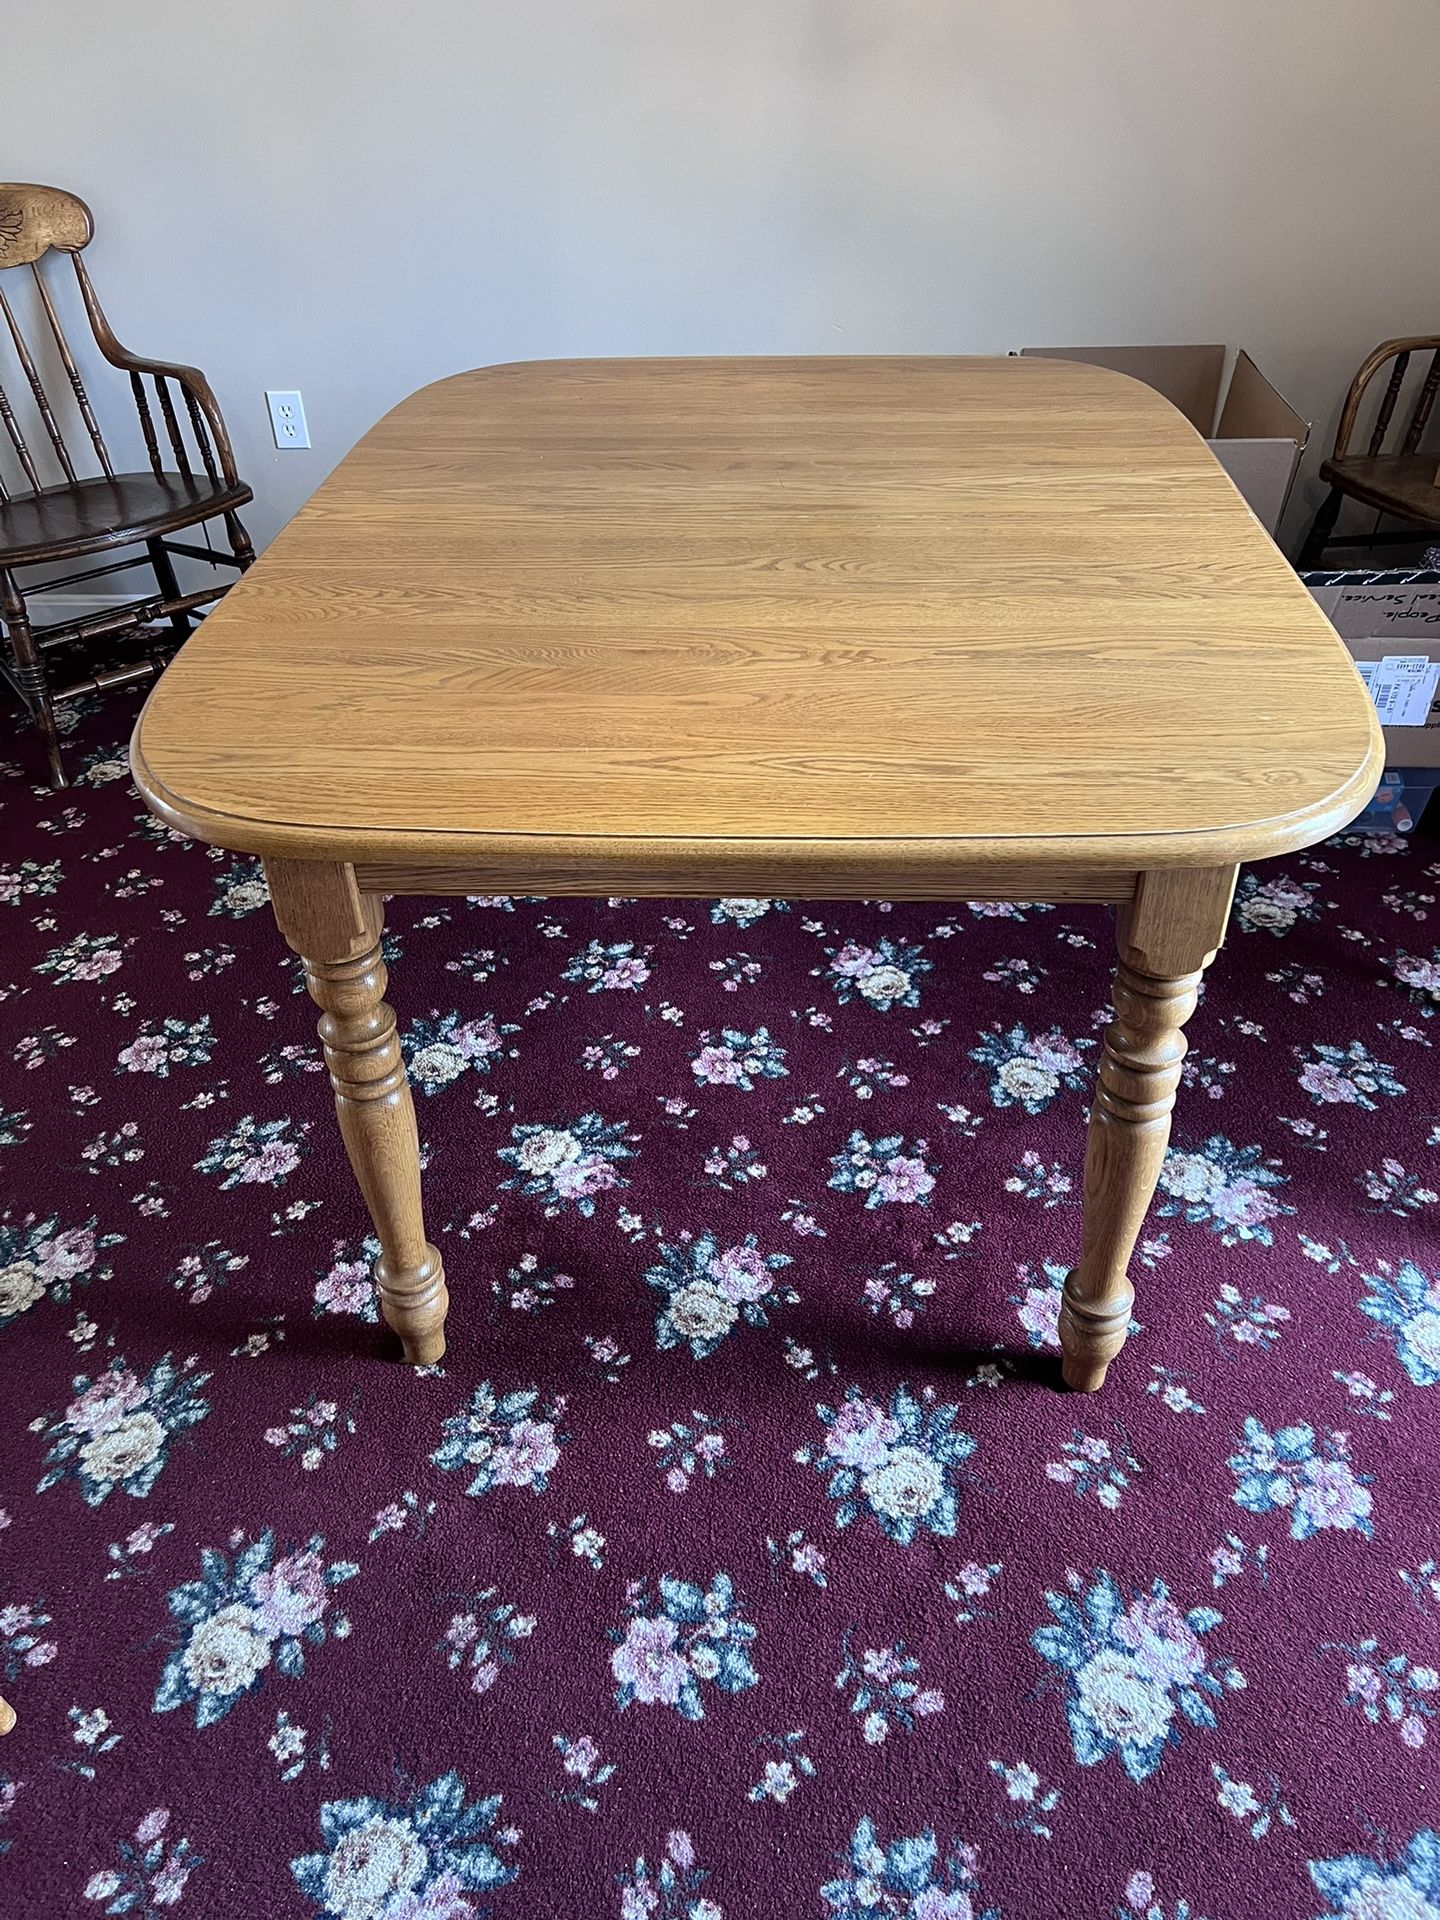 Solid oak Amish Made Table